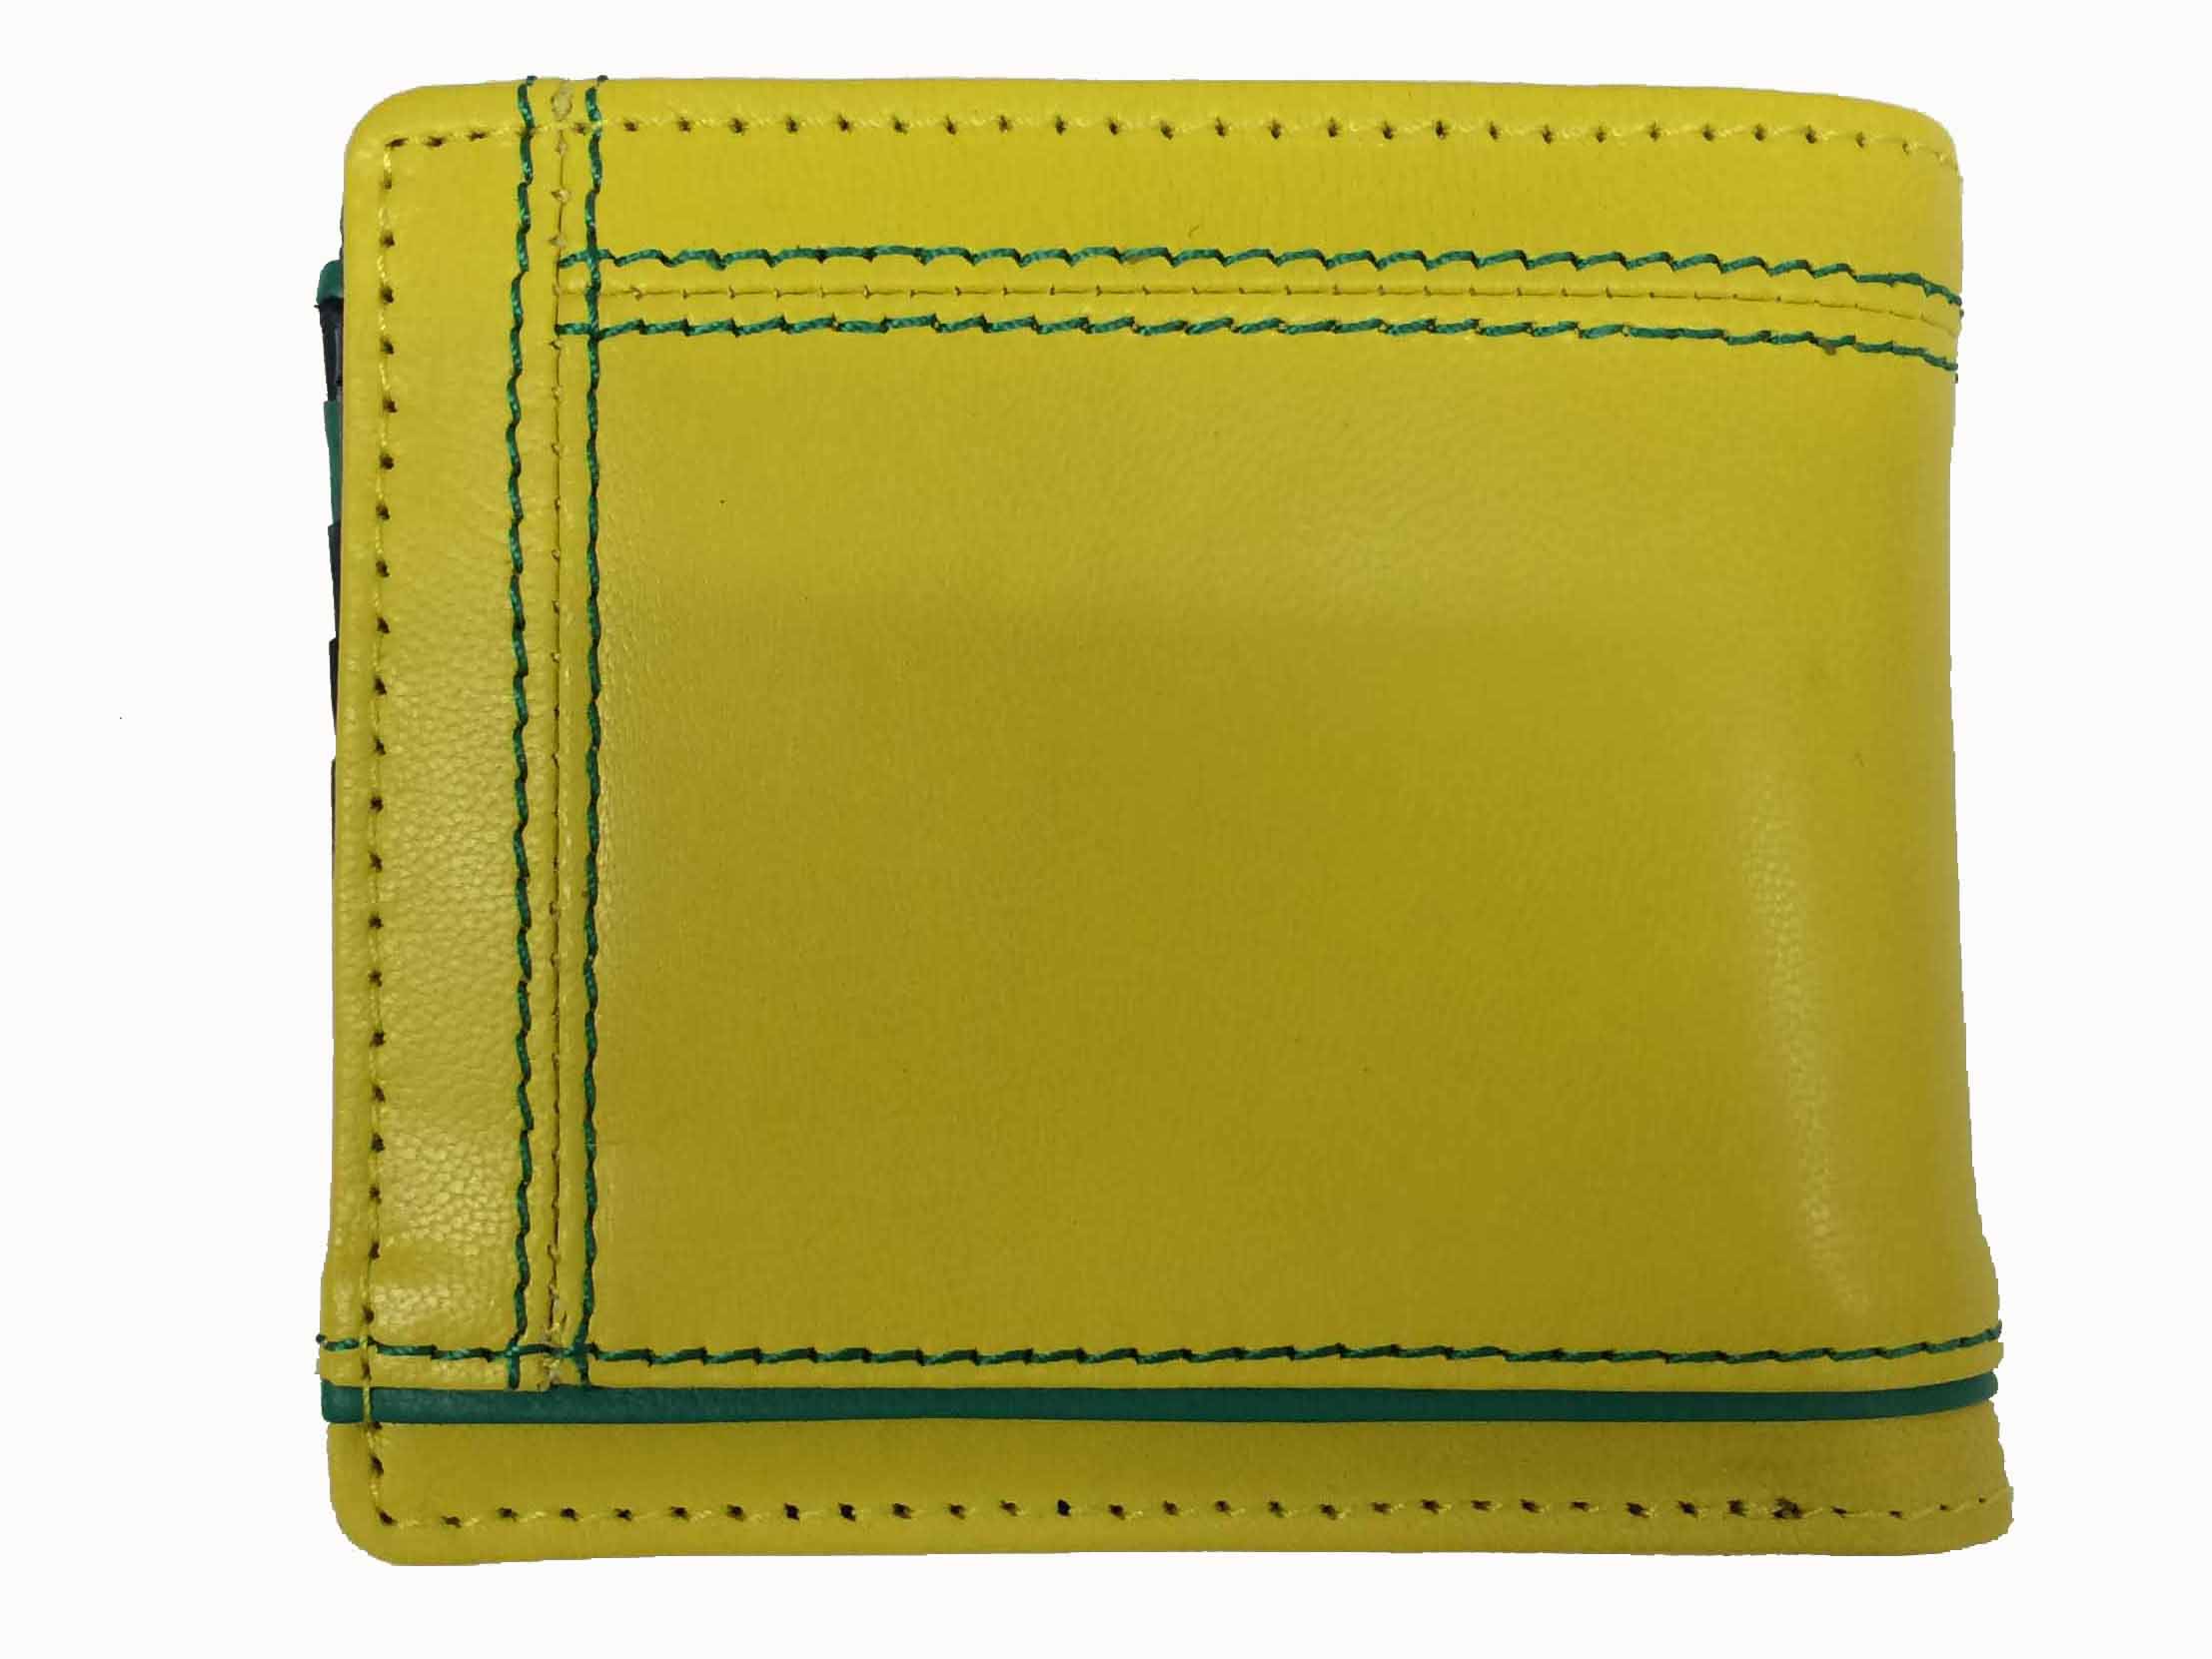 http://www.police.ne.jp/images/police-wallet-colore-yellow_02.jpg